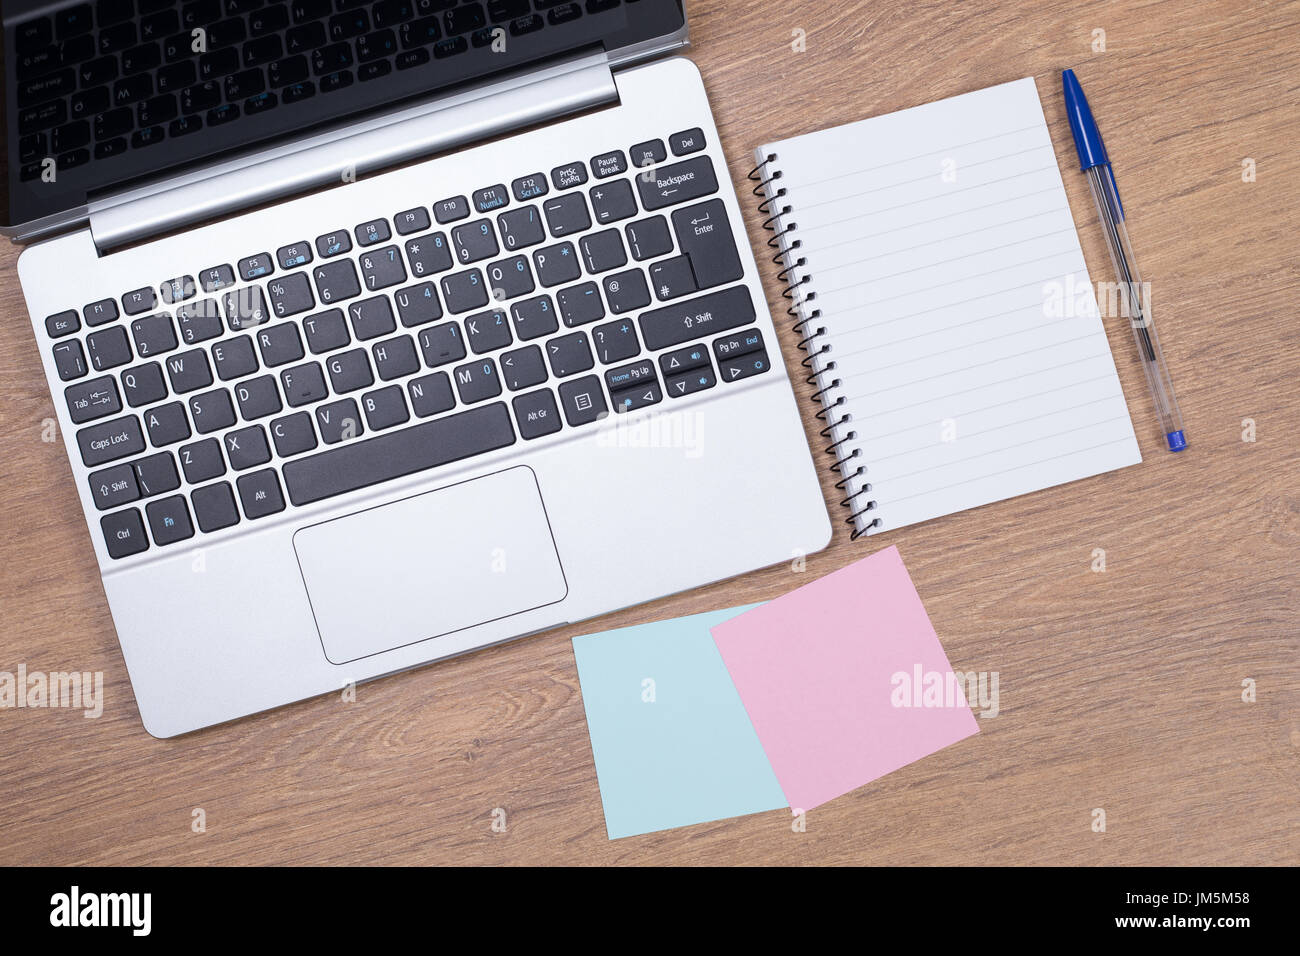 white lined note pad next to open laptop with sticky notes on a wooden surface Stock Photo